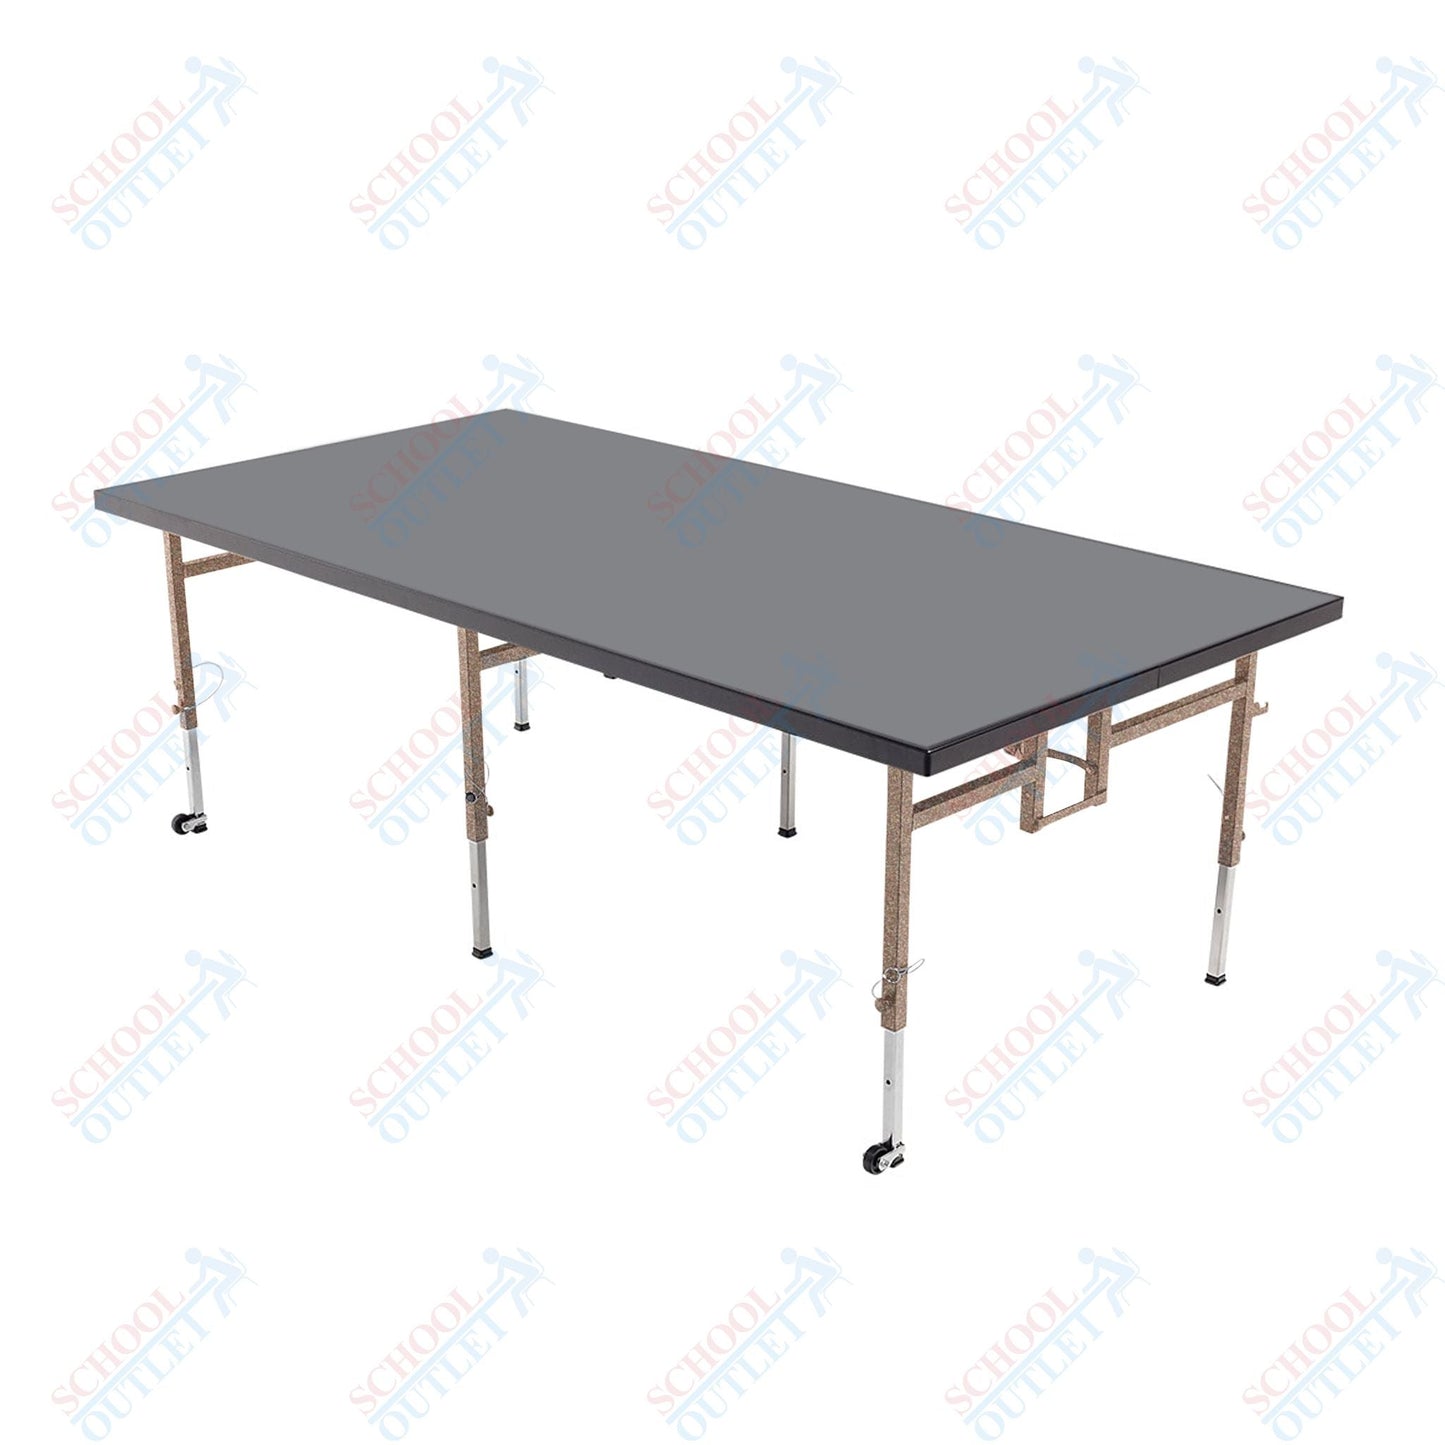 AmTab Adjustable Height Stage - Polypropylene Top - 48"W x 96"L x Adjustable 16" to 24"H (AmTab AMT-STA4816P) - SchoolOutlet